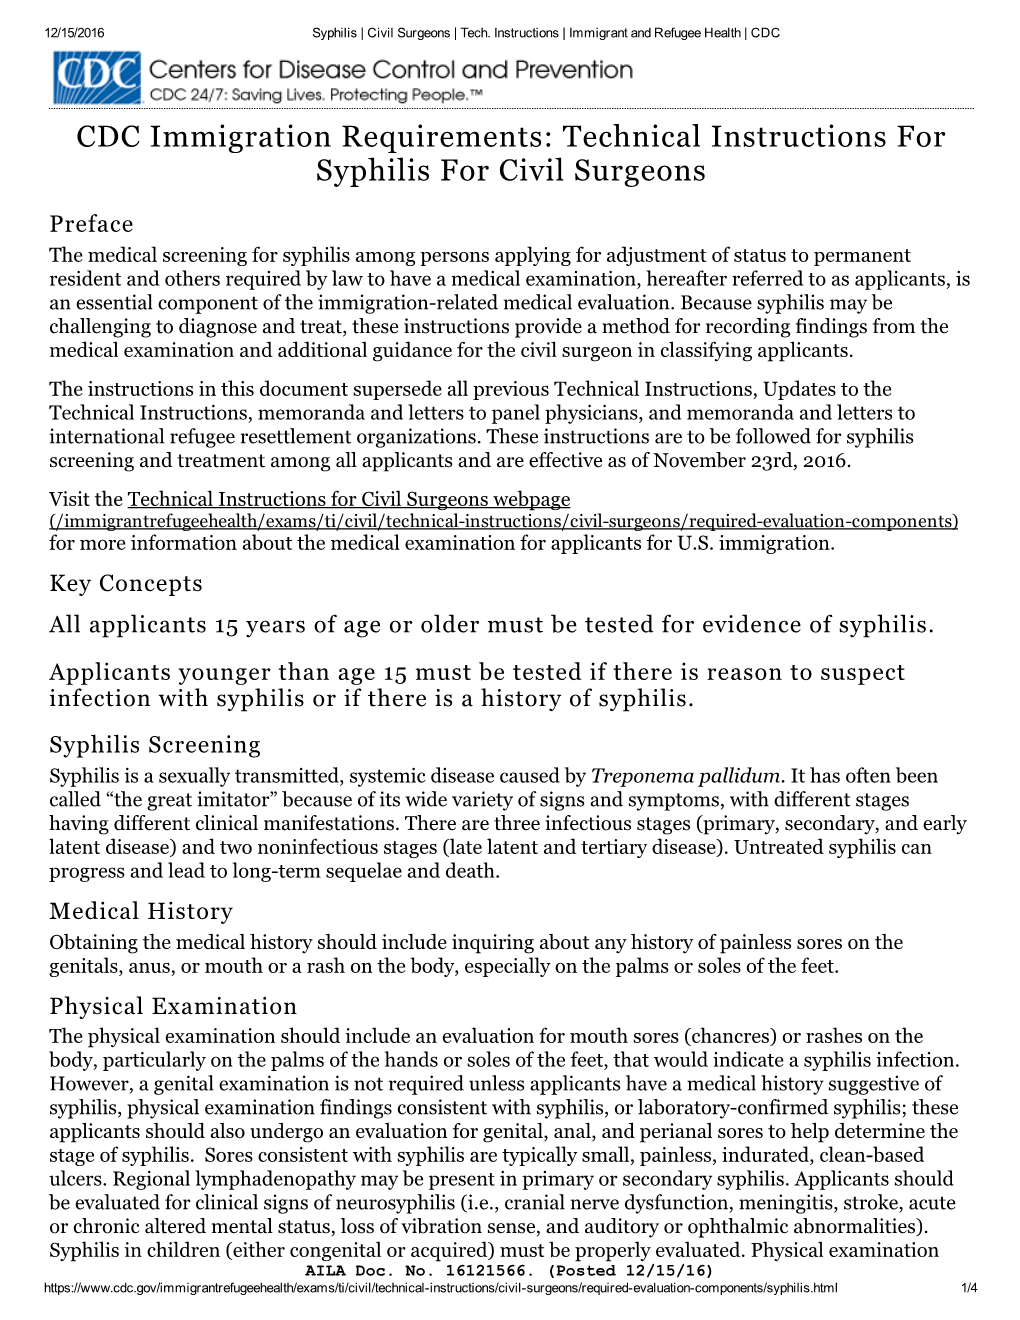 Technical Instructions for Syphilis for Civil Surgeons